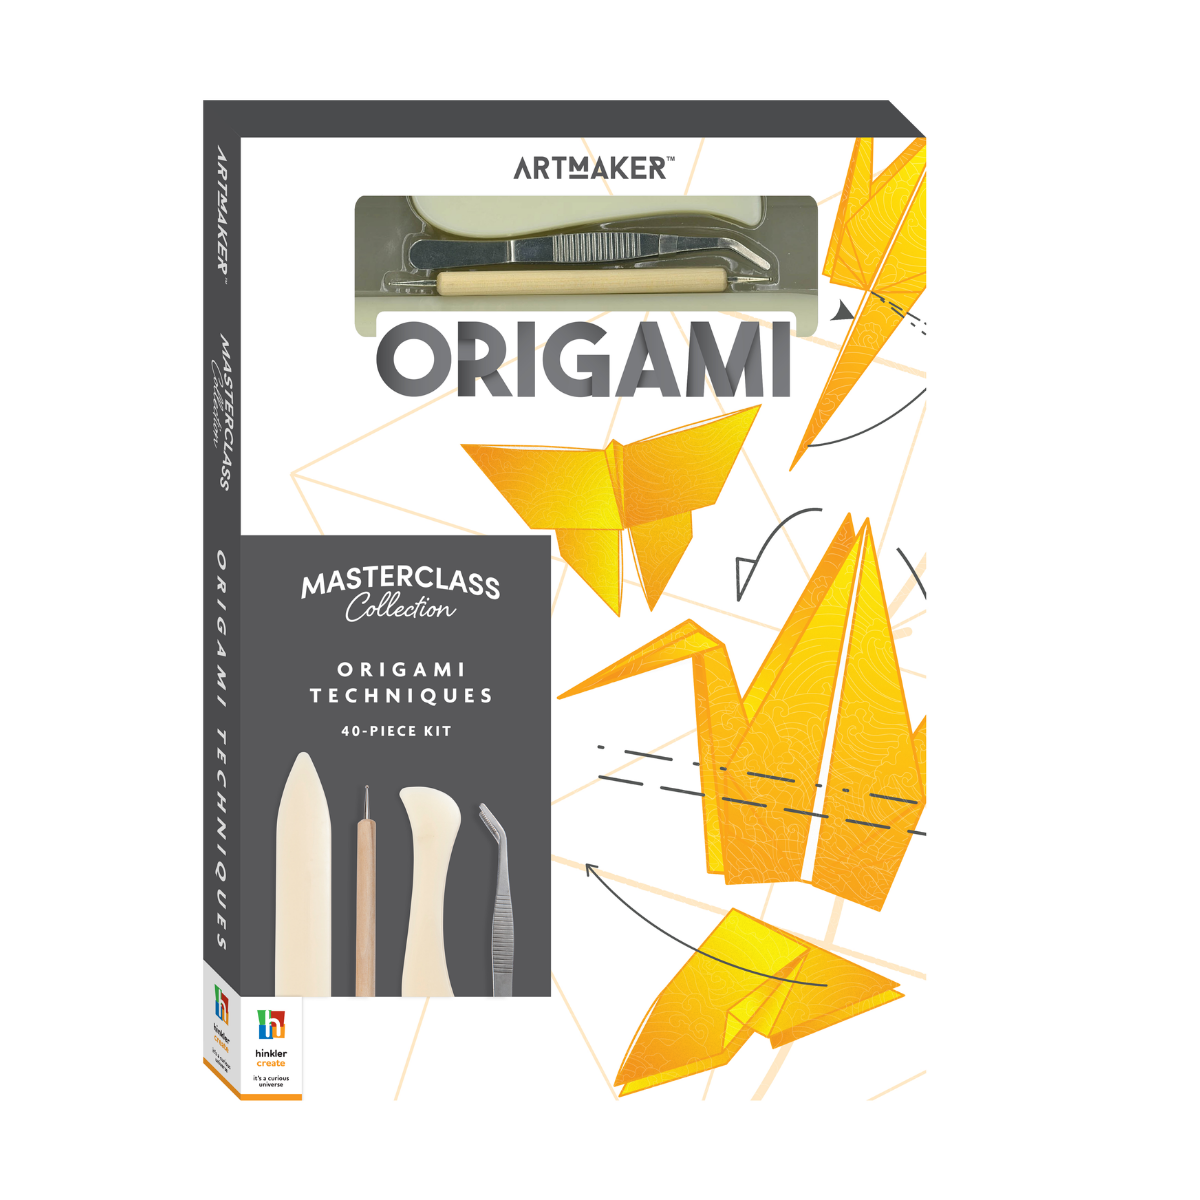 23. Unleash Creativity with an Origami Art Kit - A Unique Anniversary Gift for Him